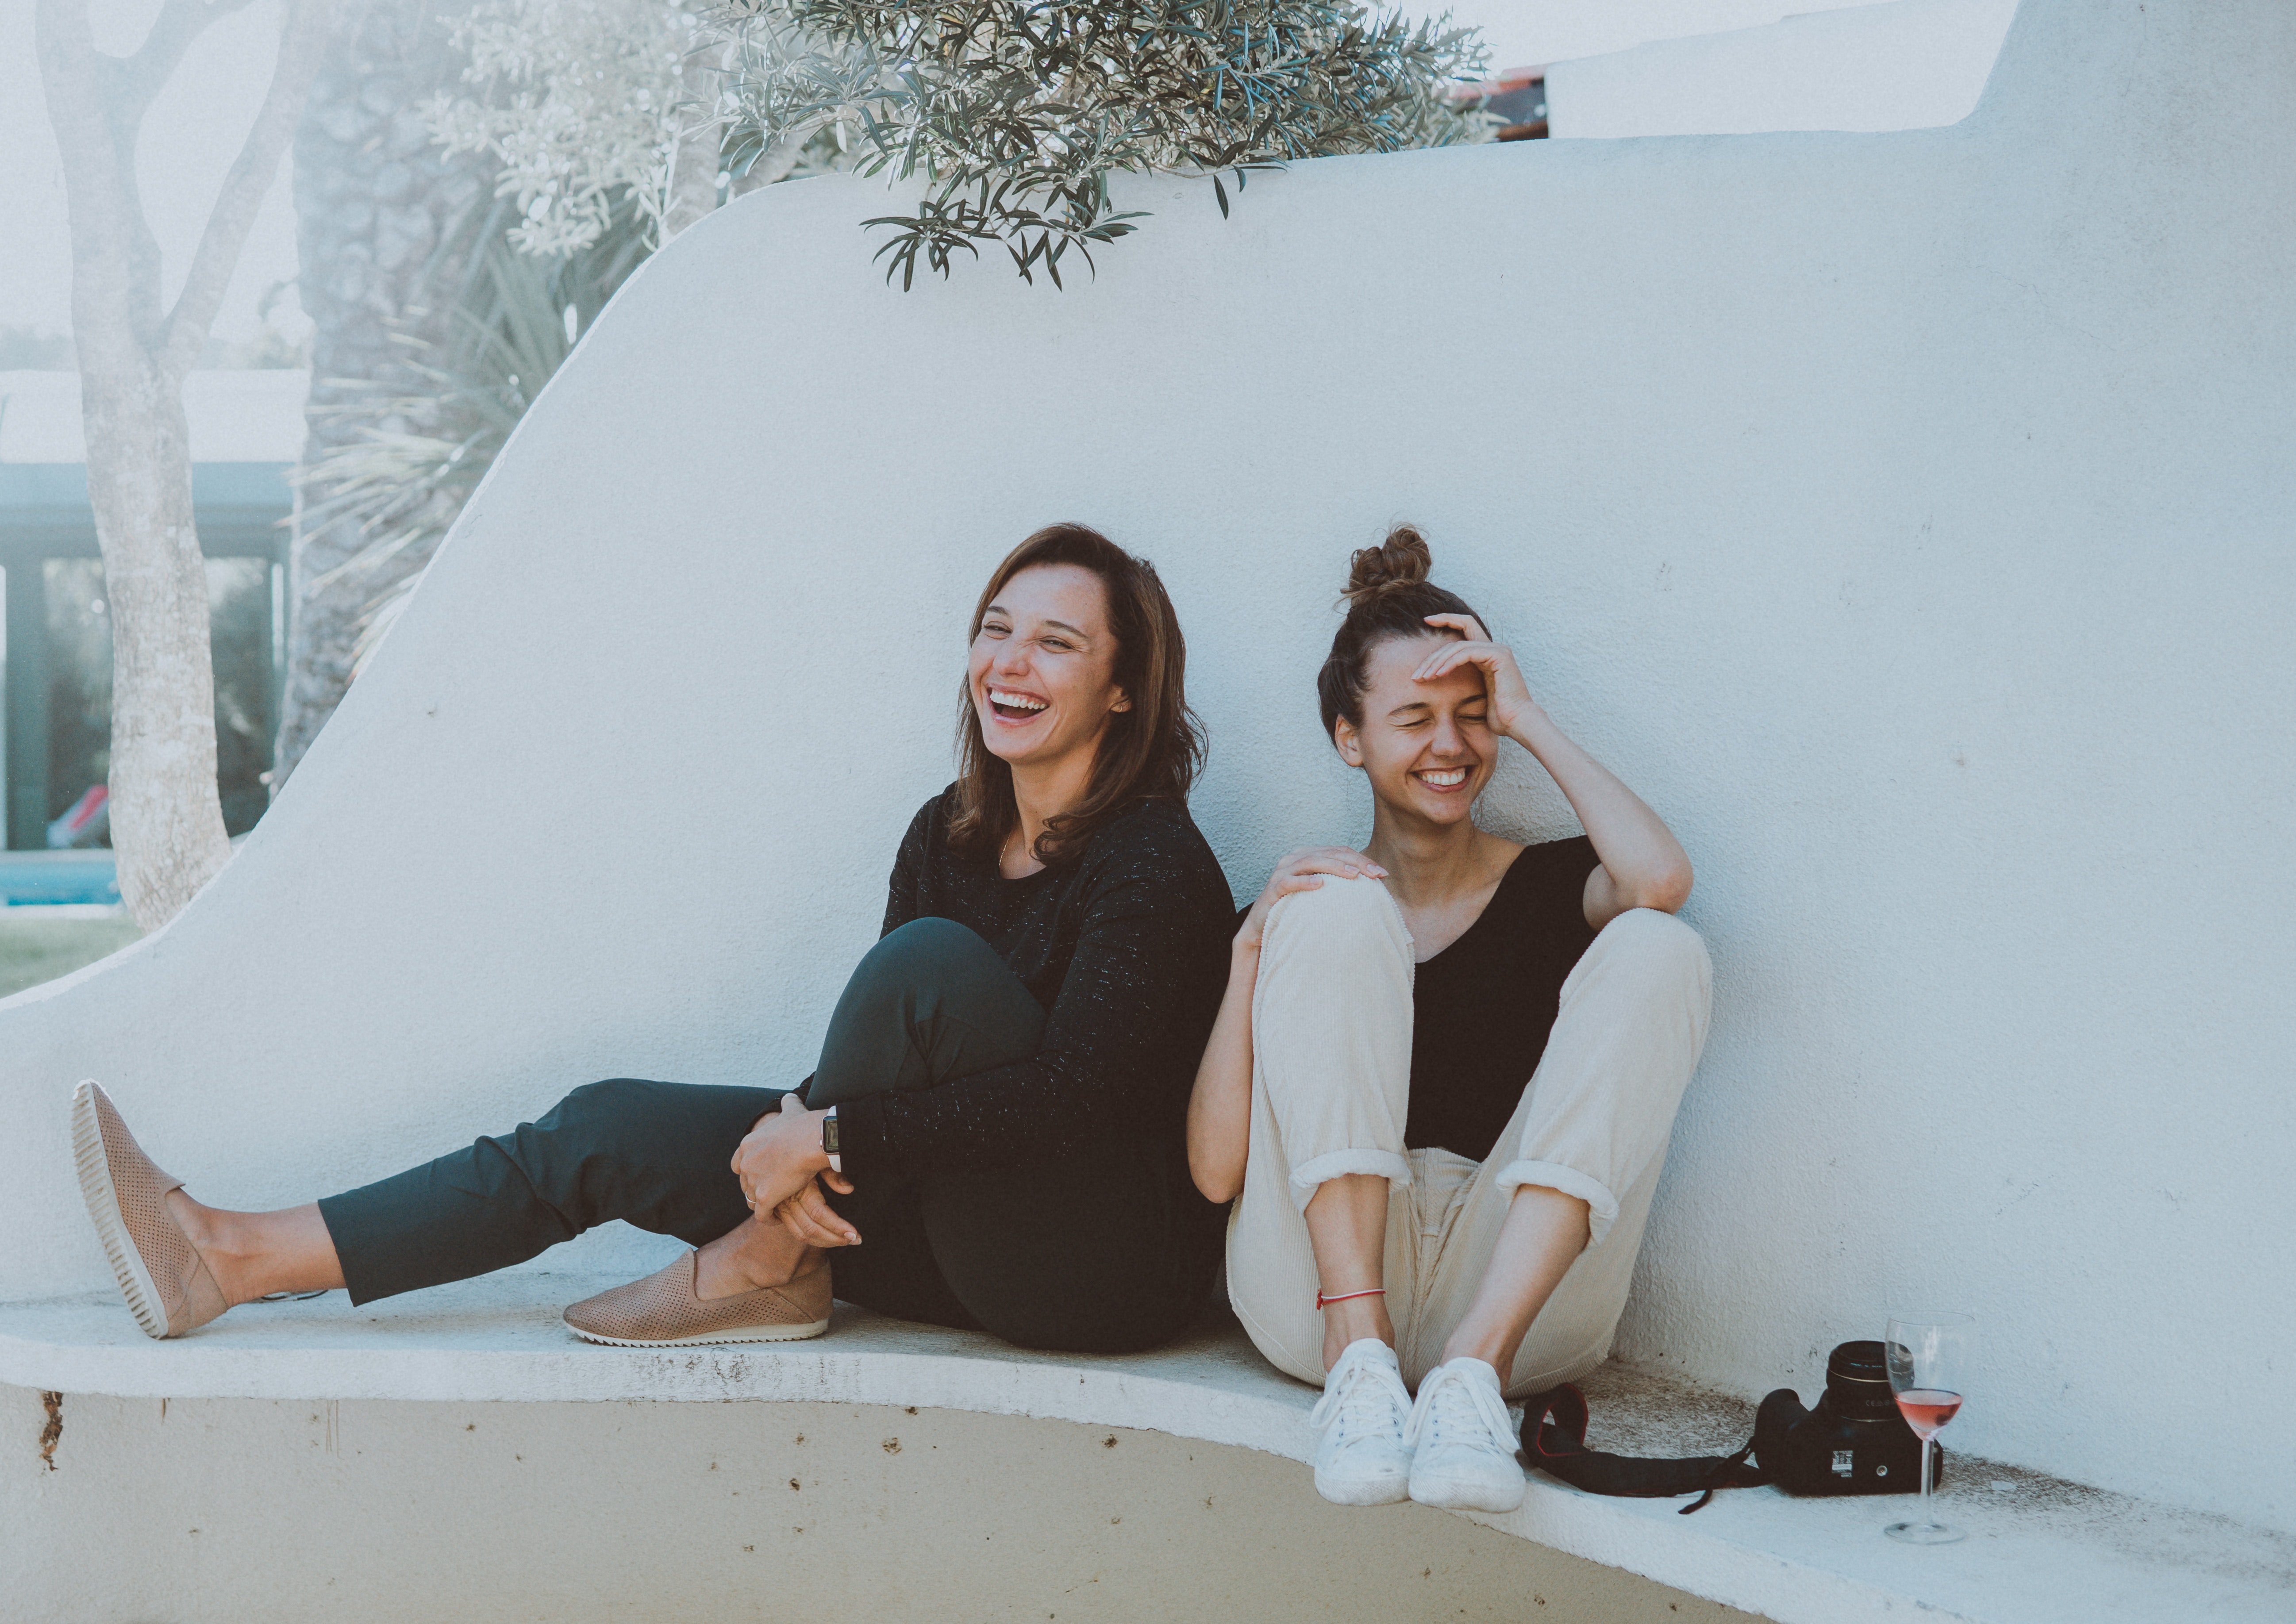 Sisters sitting outdoors, laughing together. | Photo: Pexels